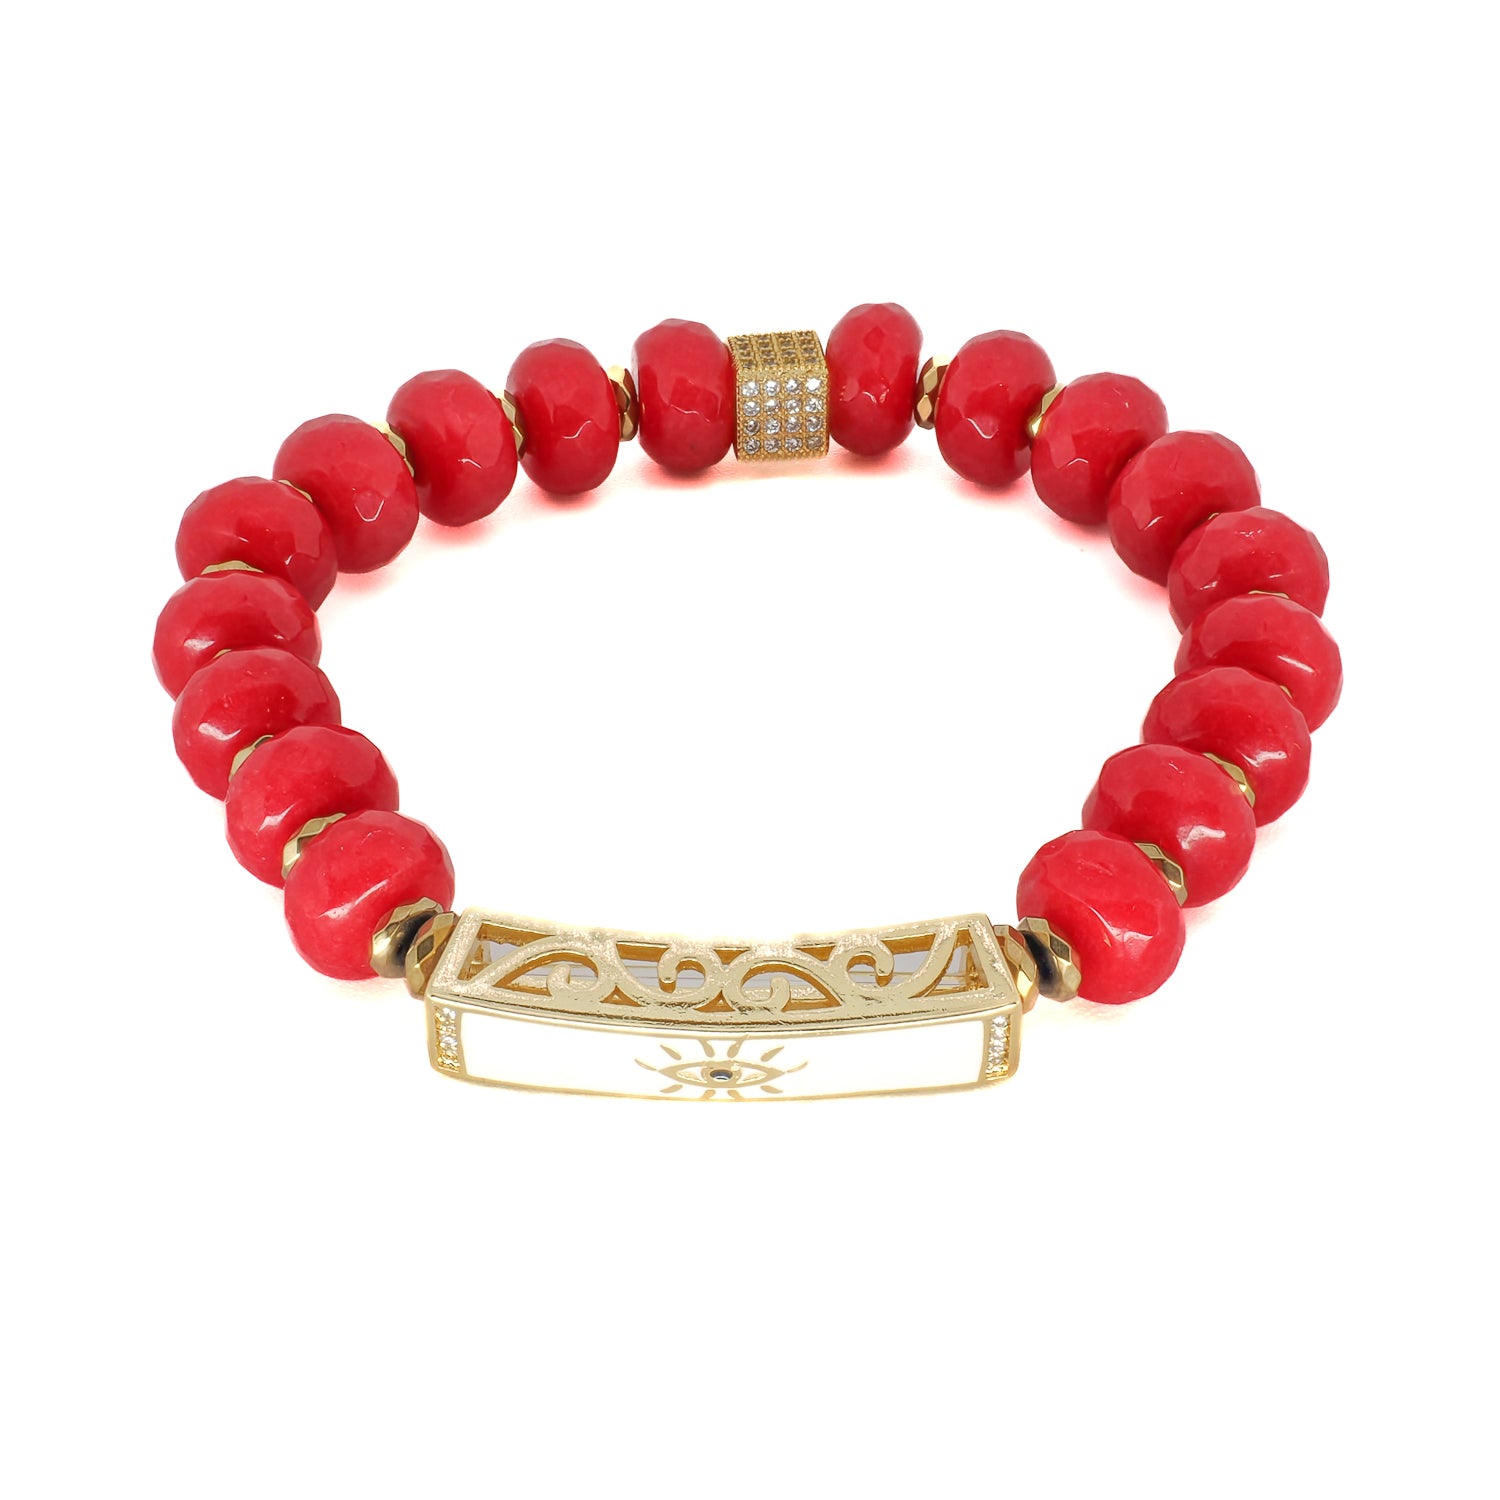 Explore the powerful and vibrant Red Energy Evil Eye Bracelet, featuring red coral stone beads and a large evil eye charm.